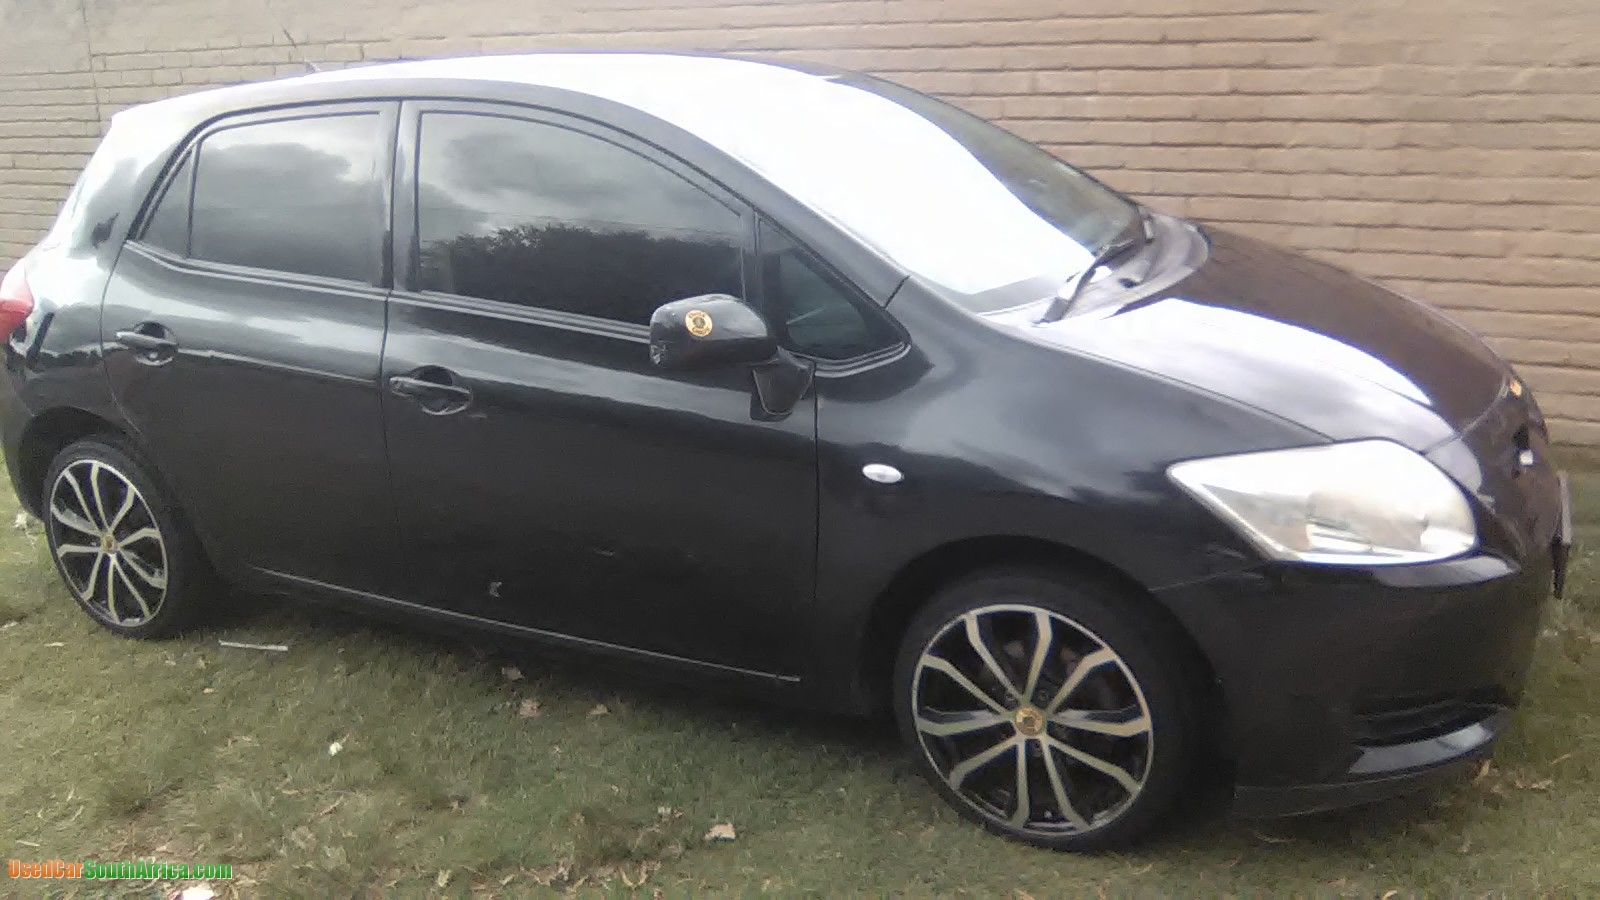 2008 Toyota Auris 1.4 RT used car for sale in Johannesburg